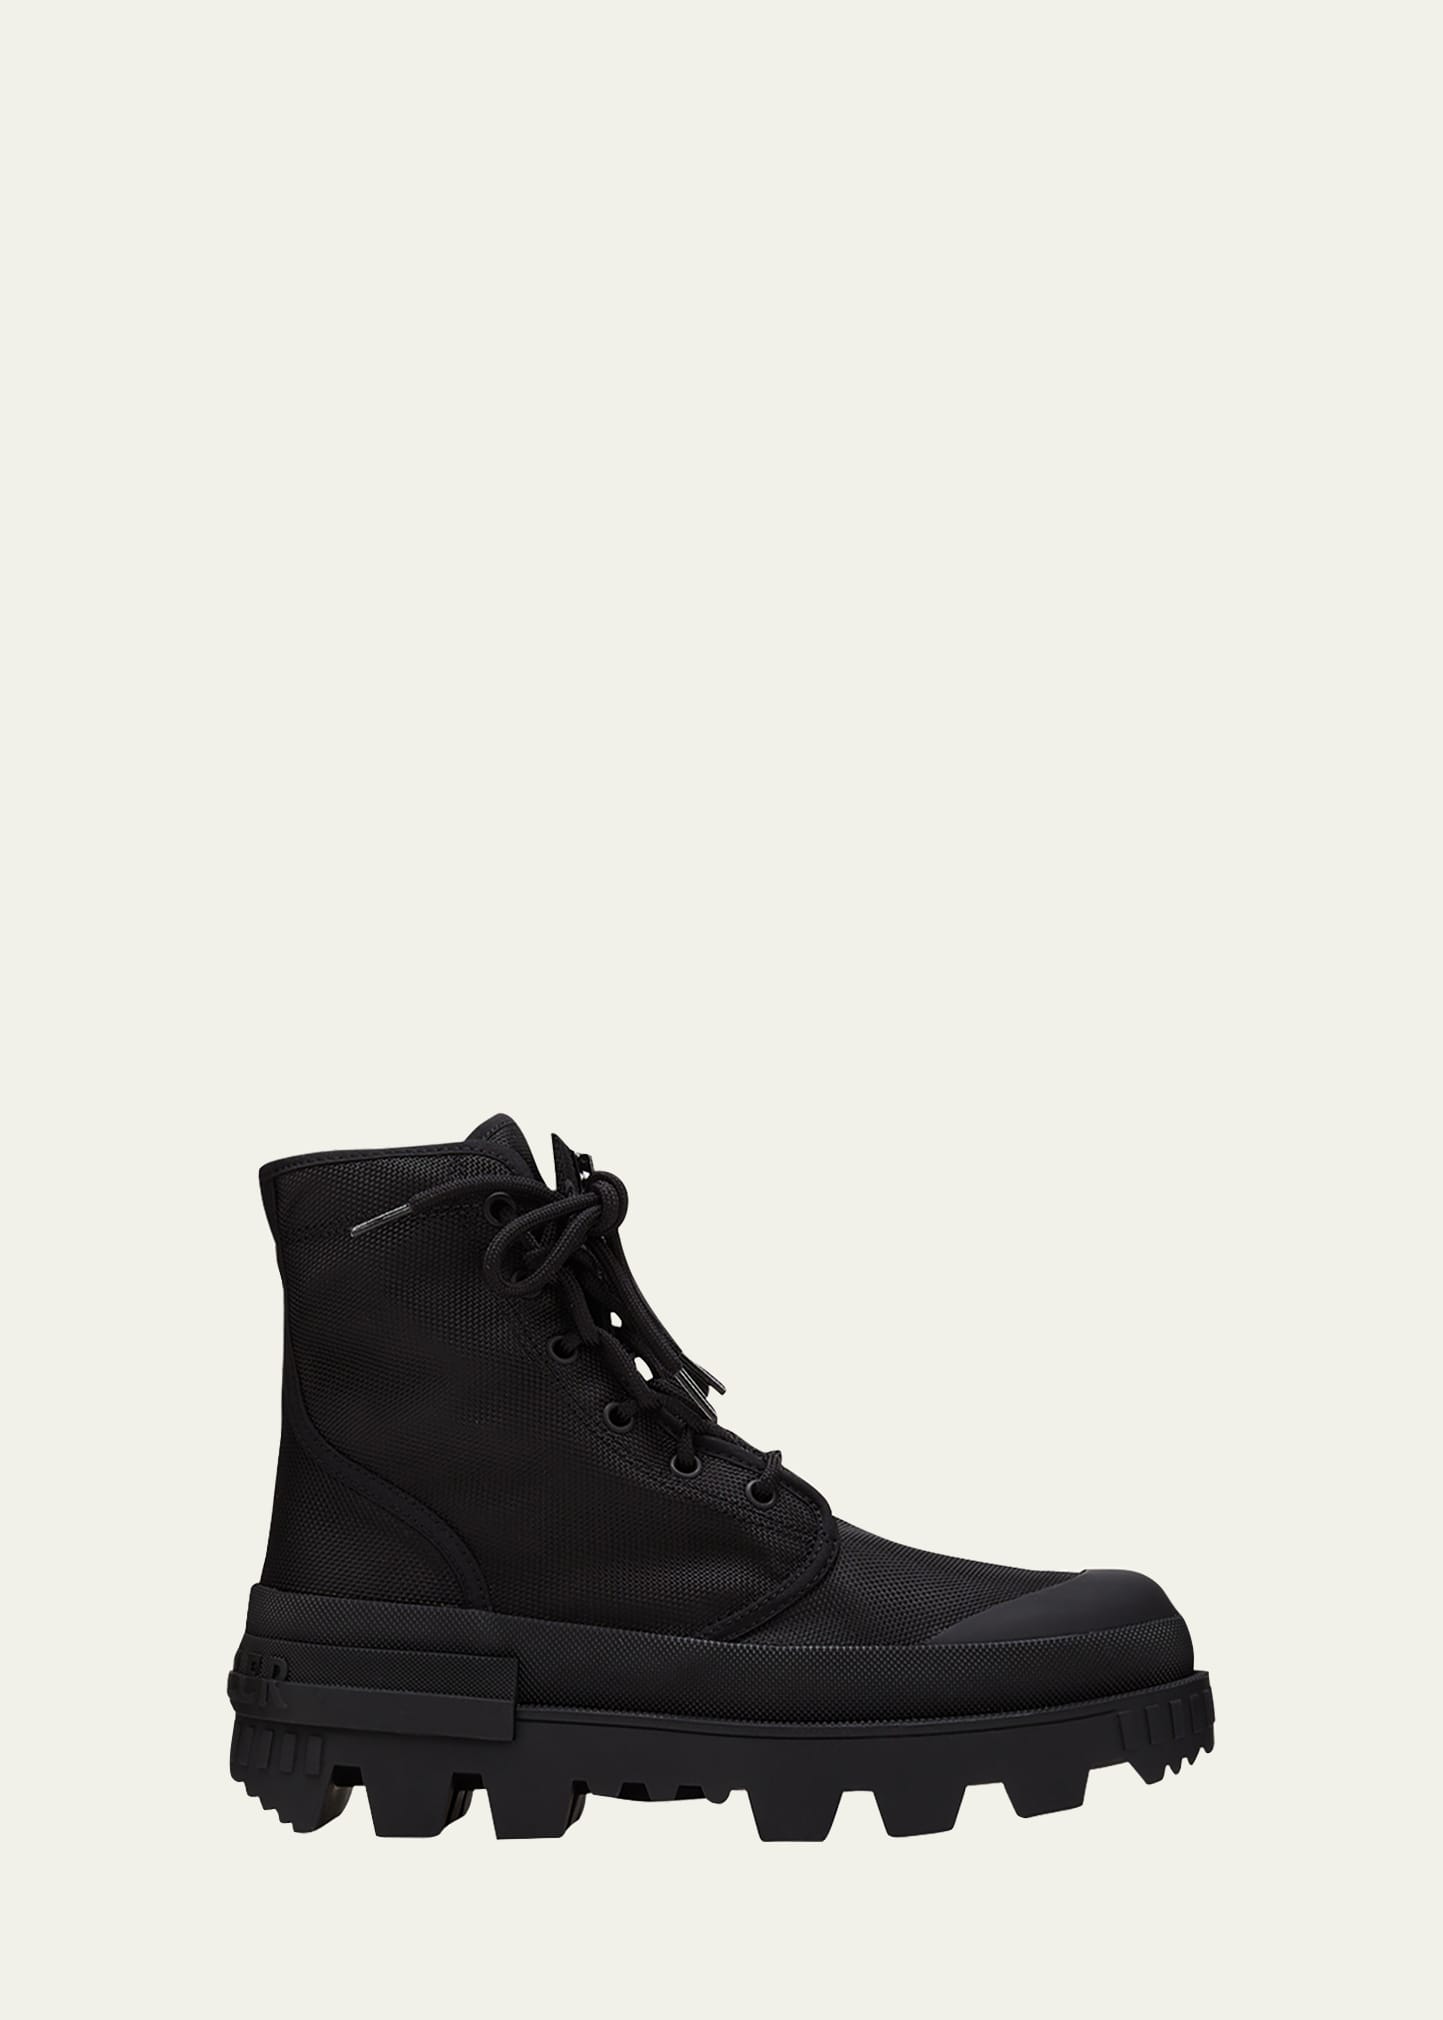 Moncler Genius Hyke Ankle Boot In Nero